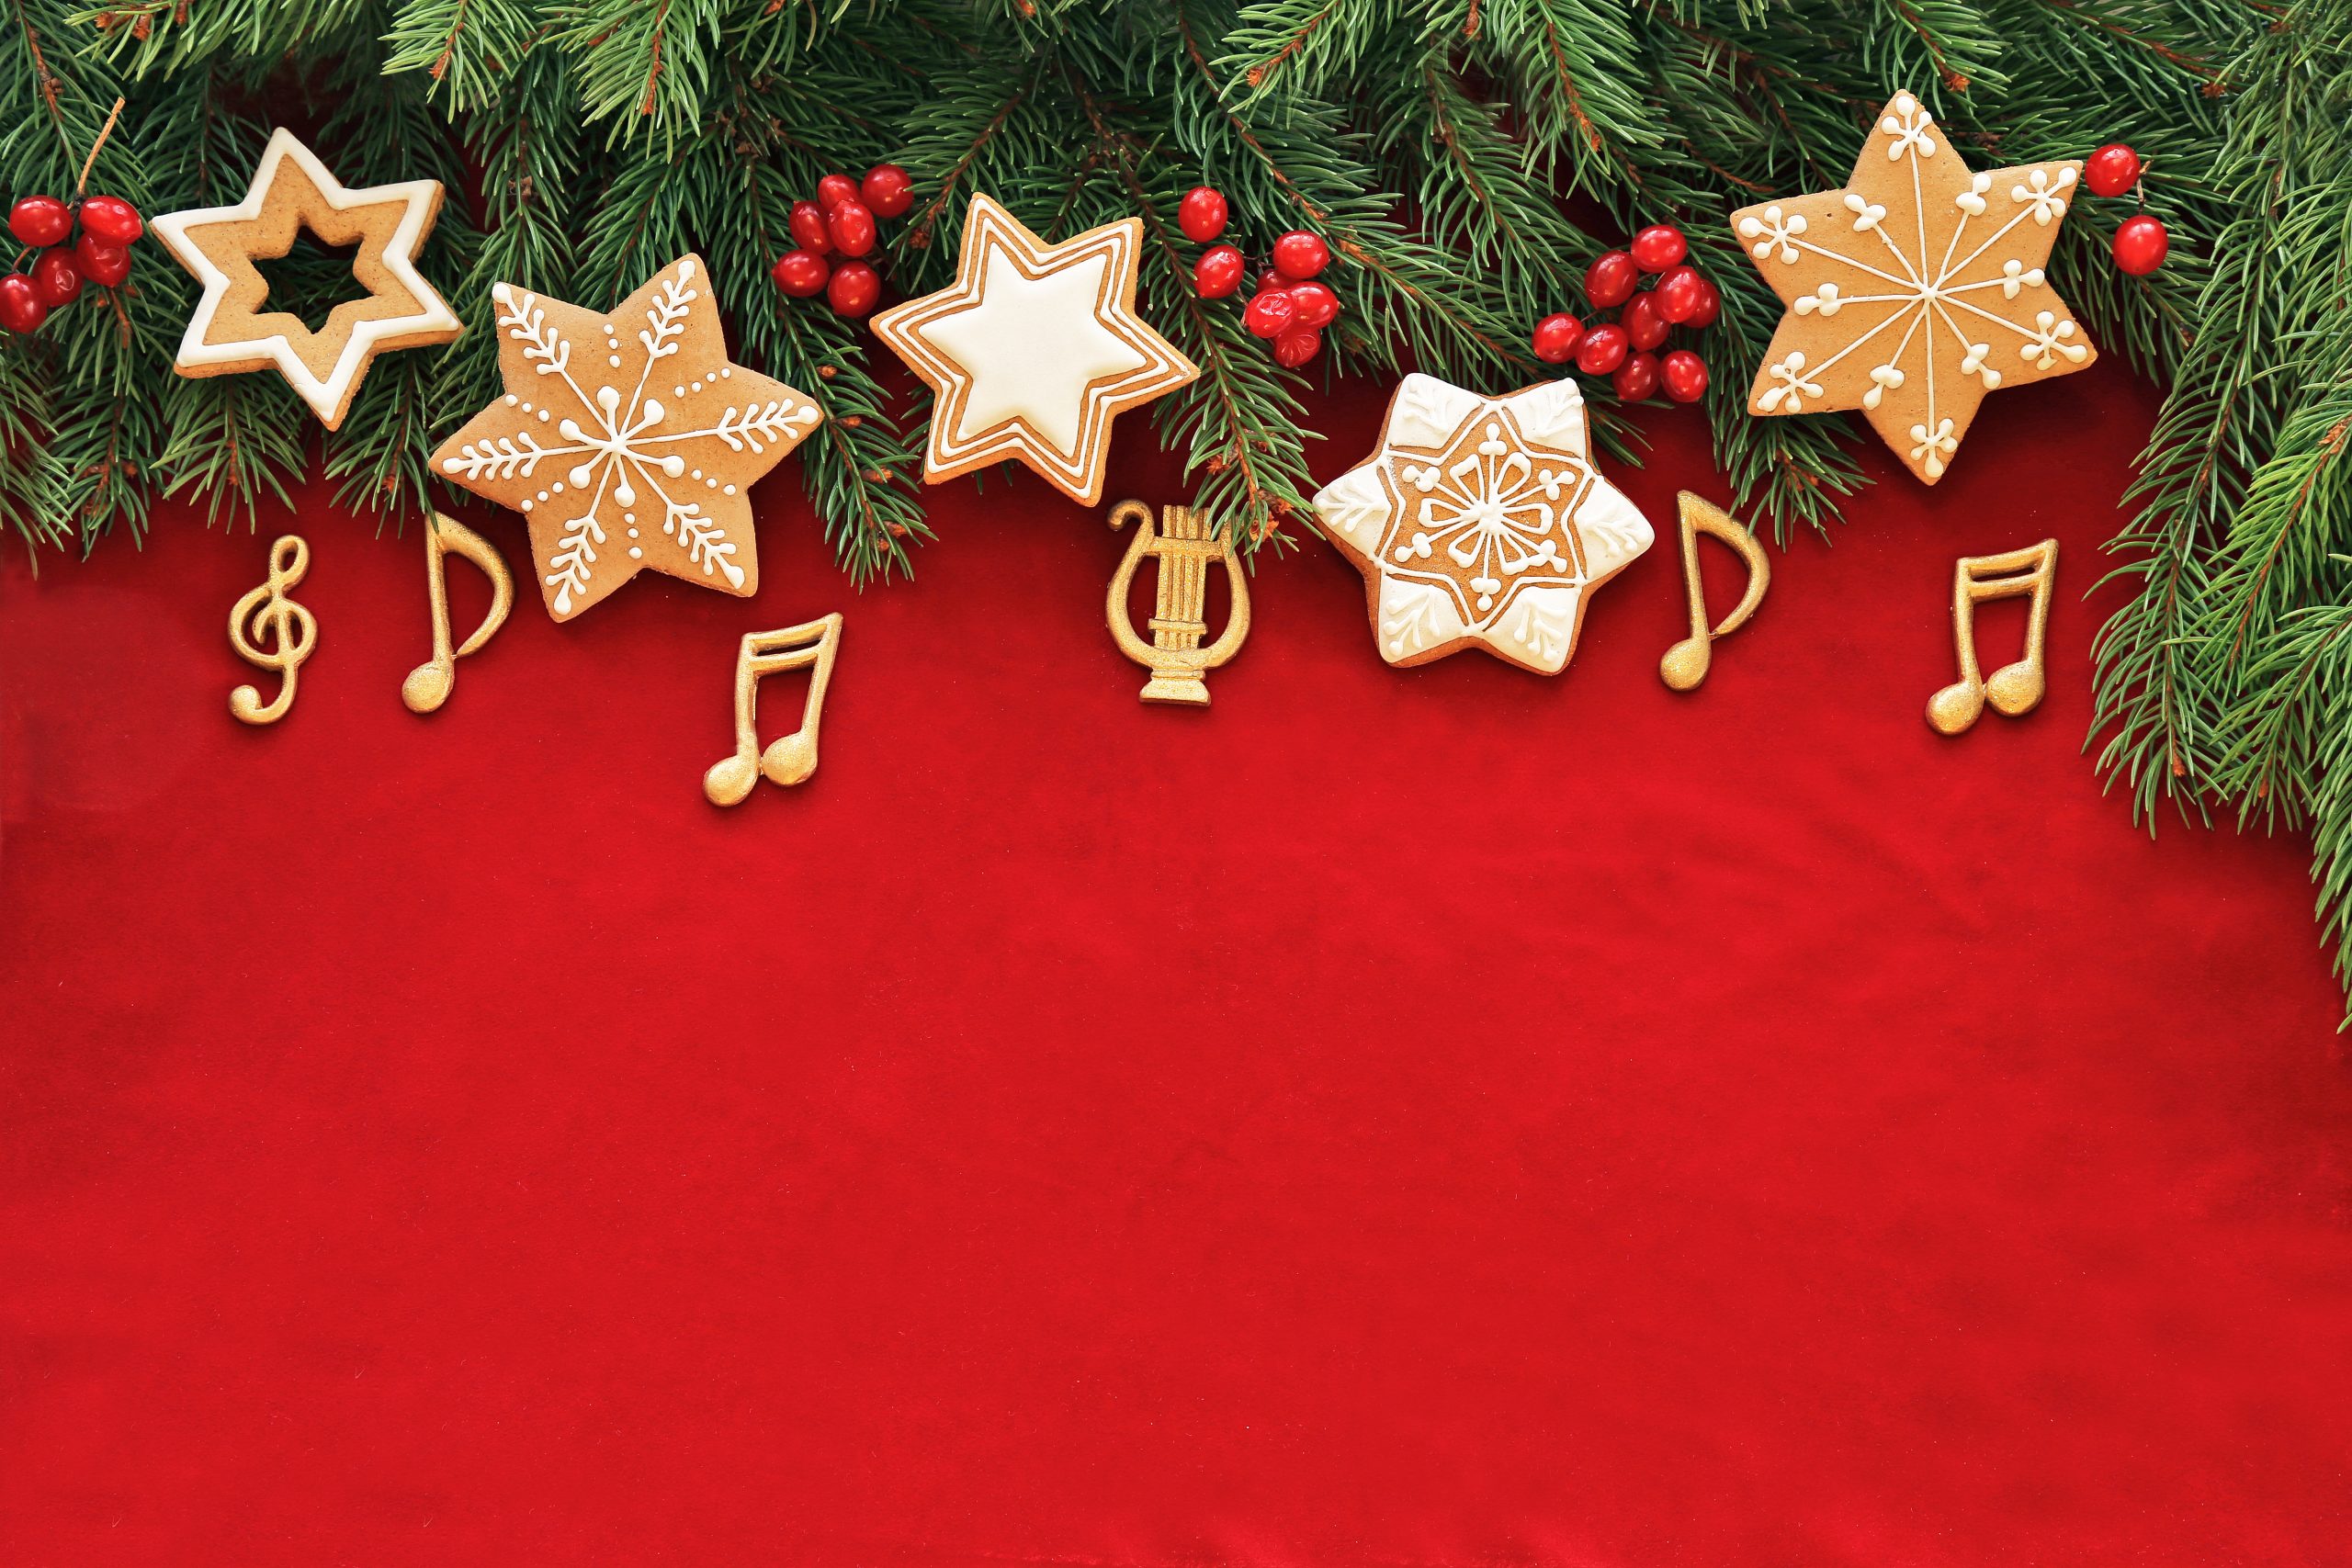 Festive Music – for Church Services, Page 66